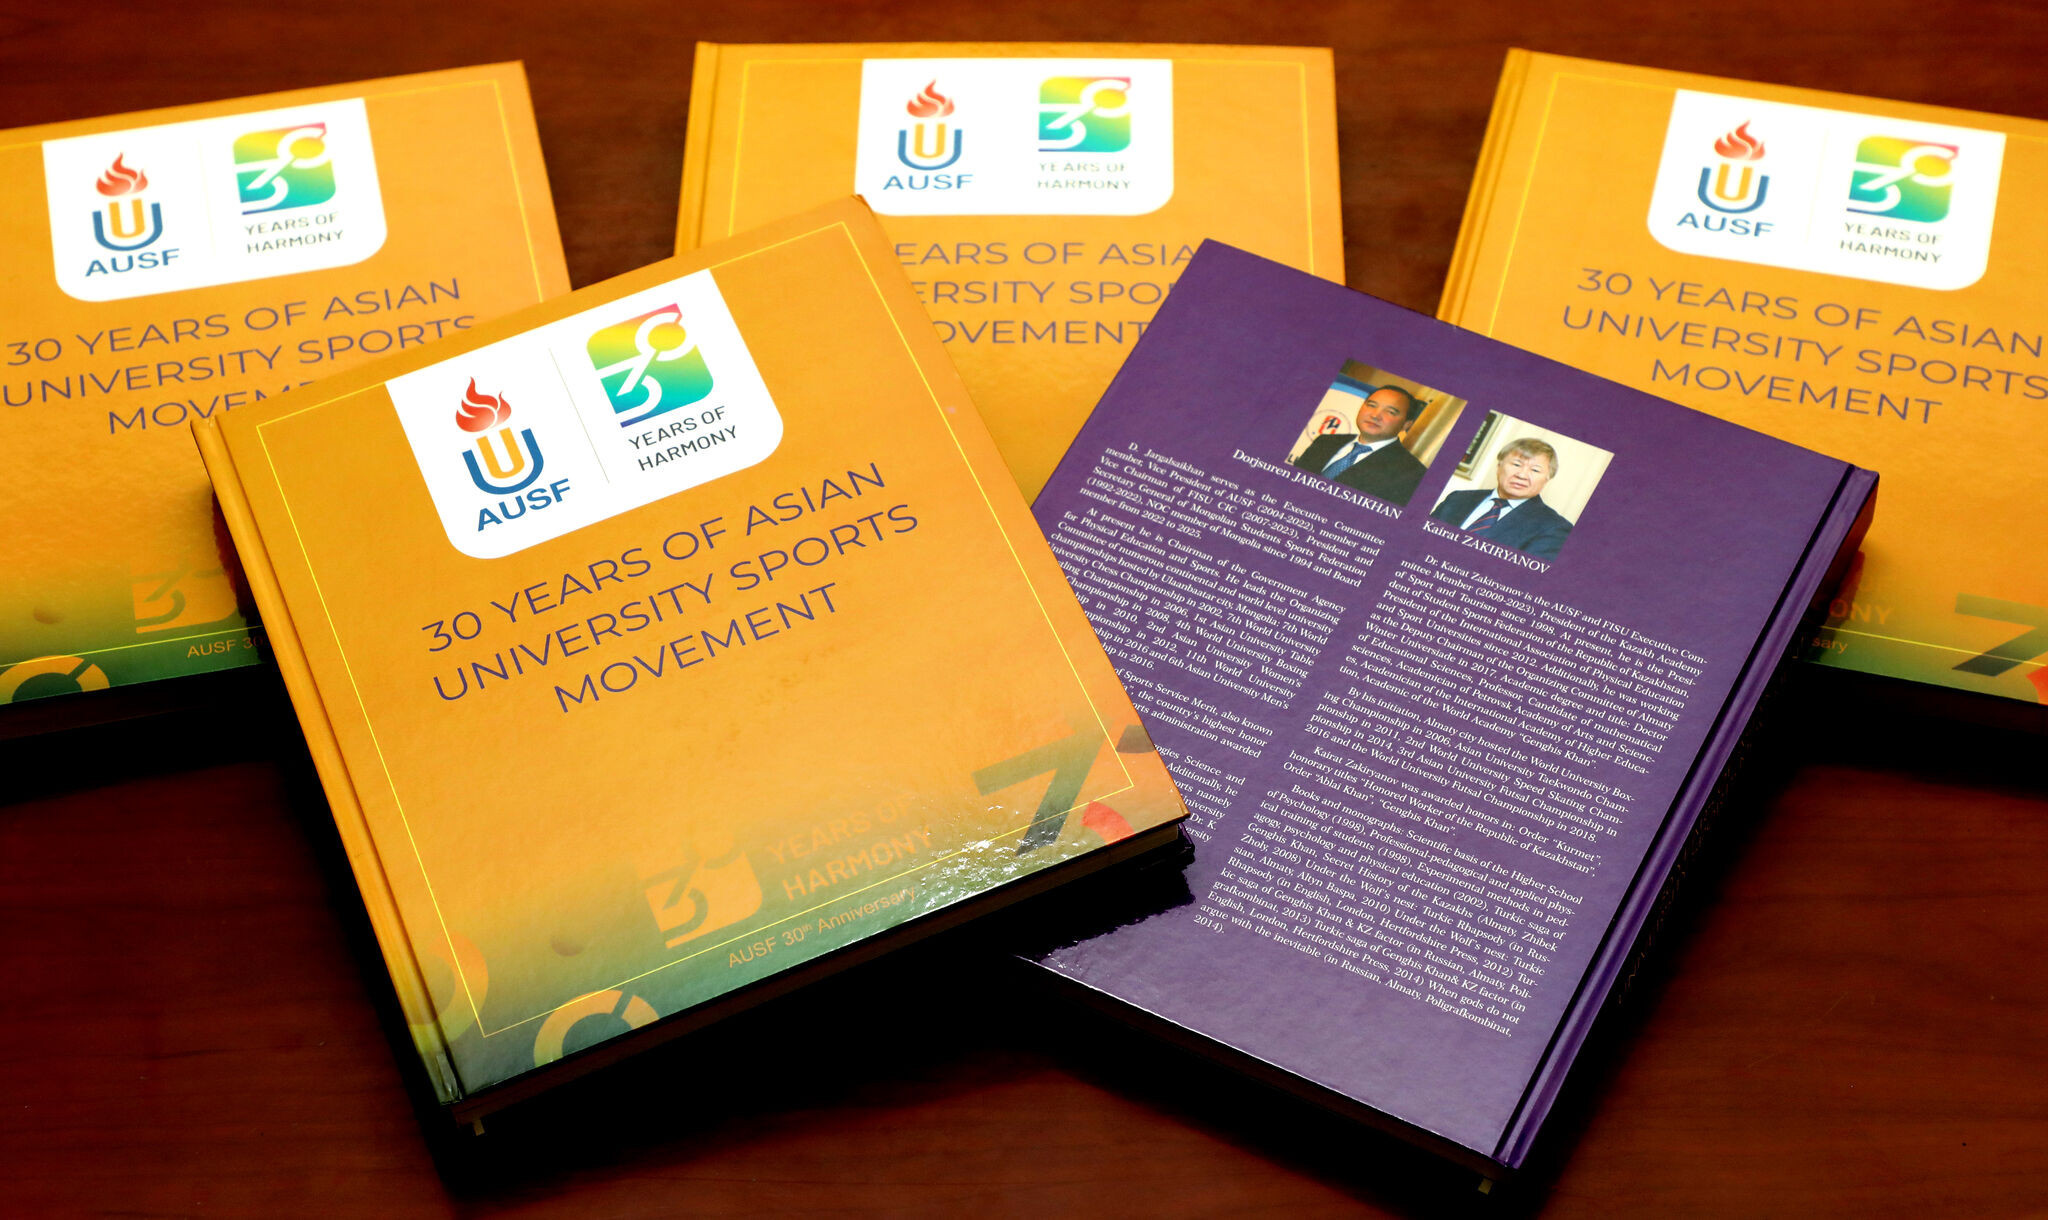 A new book has been written and launched to mark the 30th anniversary of the Asian University Sports Federation ©AUSF